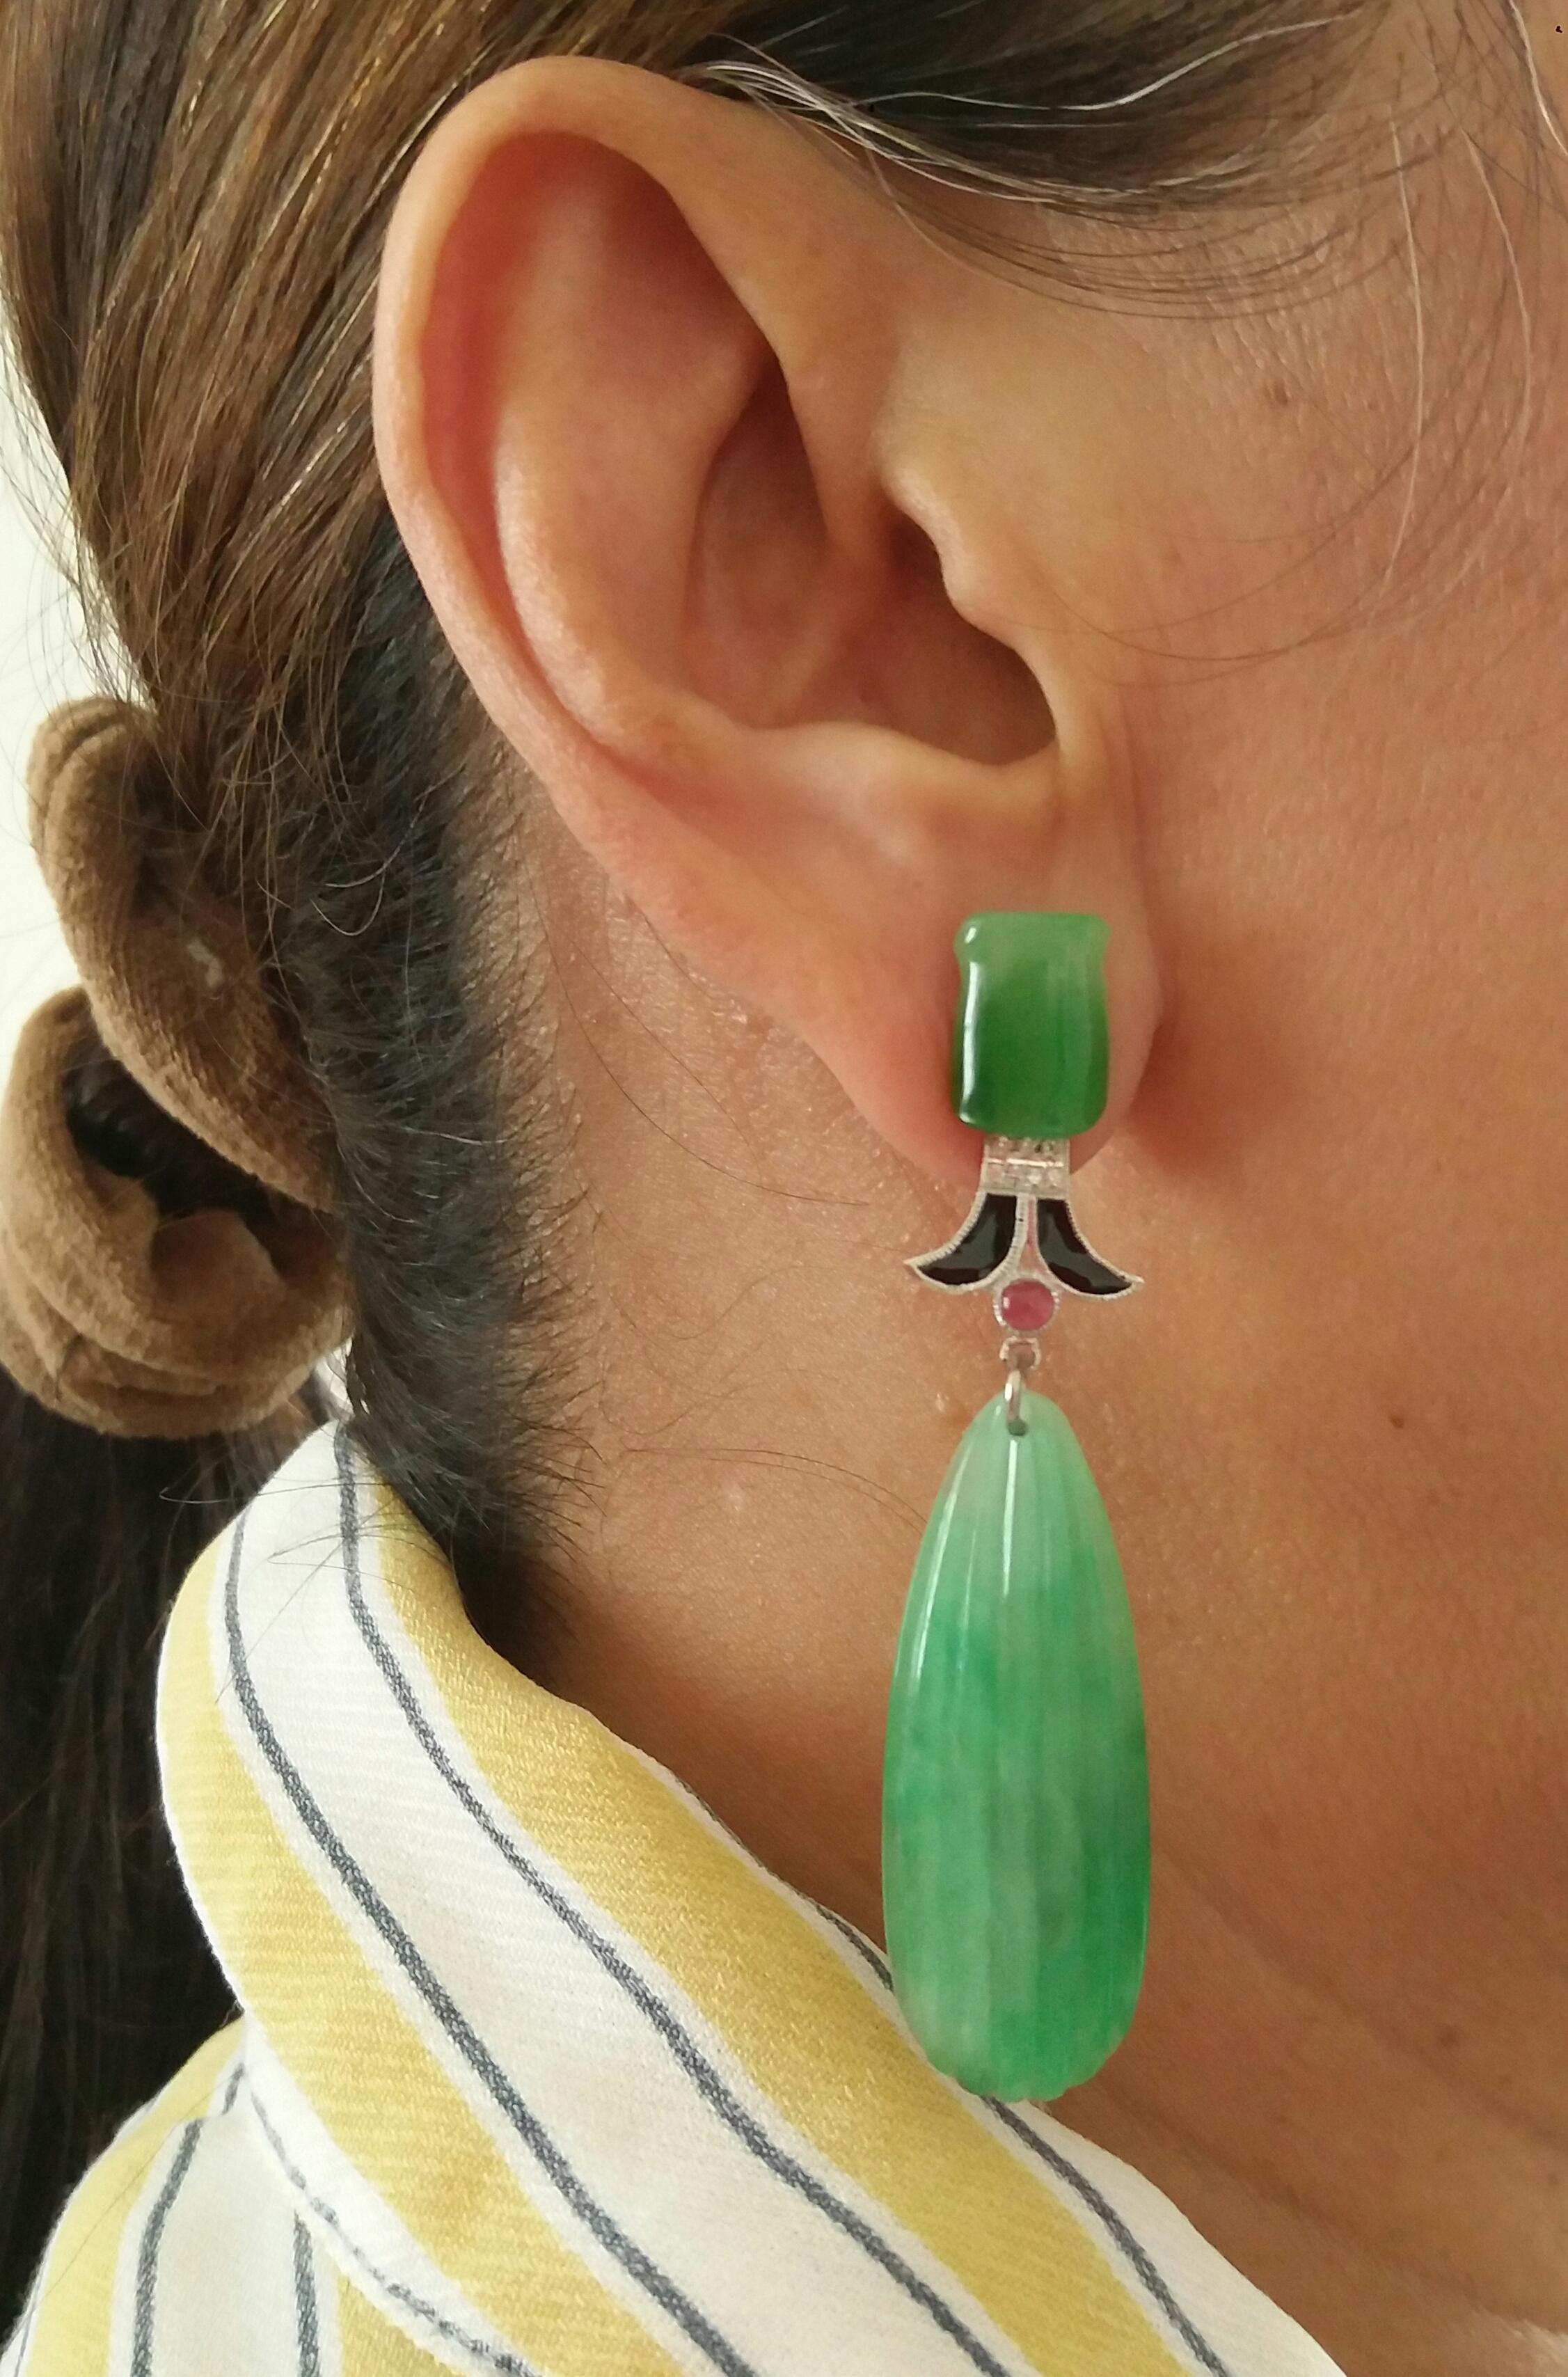 In these classic Art Deco Style earrings we have the tops with 2 Bamboo shape Jades ,the middle parts are composed of 2 elements in White Gold ,Rubies, Diamonds and Black Enamel,while in the bottom parts we have 2 engraved Burma Jade flat drops

In